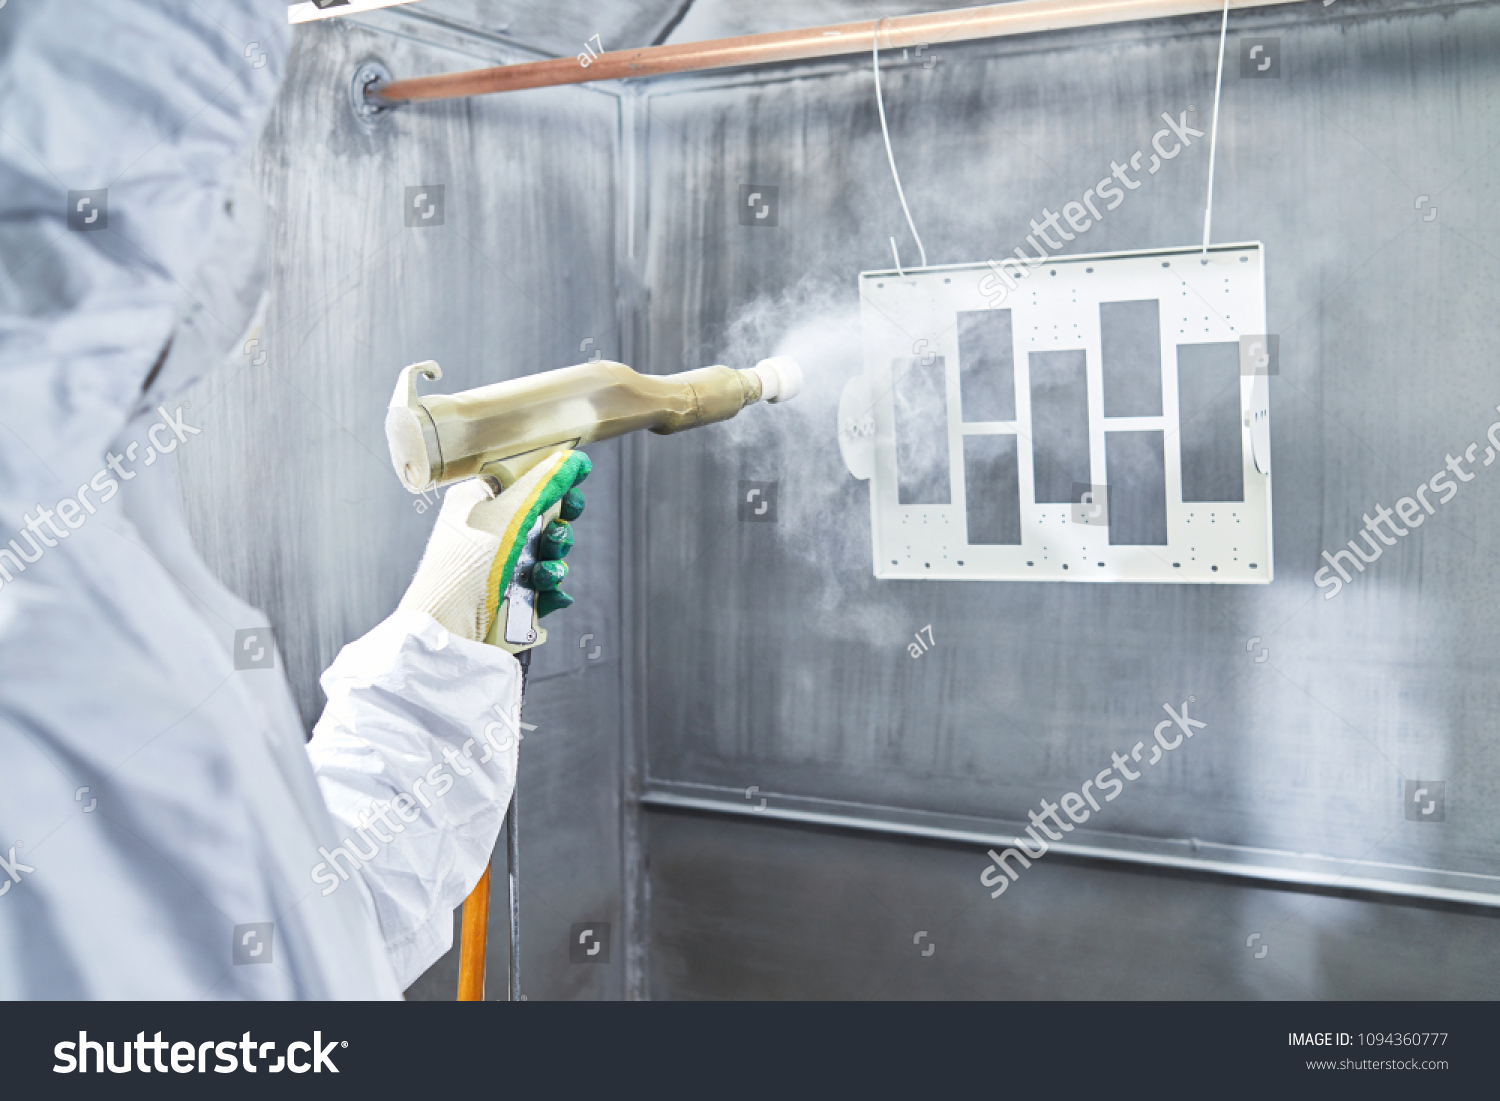 Powder coating of metal parts. Worker wearing protective wear performing powder coating of metal details in a special industrial camera. Hand holding powder coating sprayer #1094360777